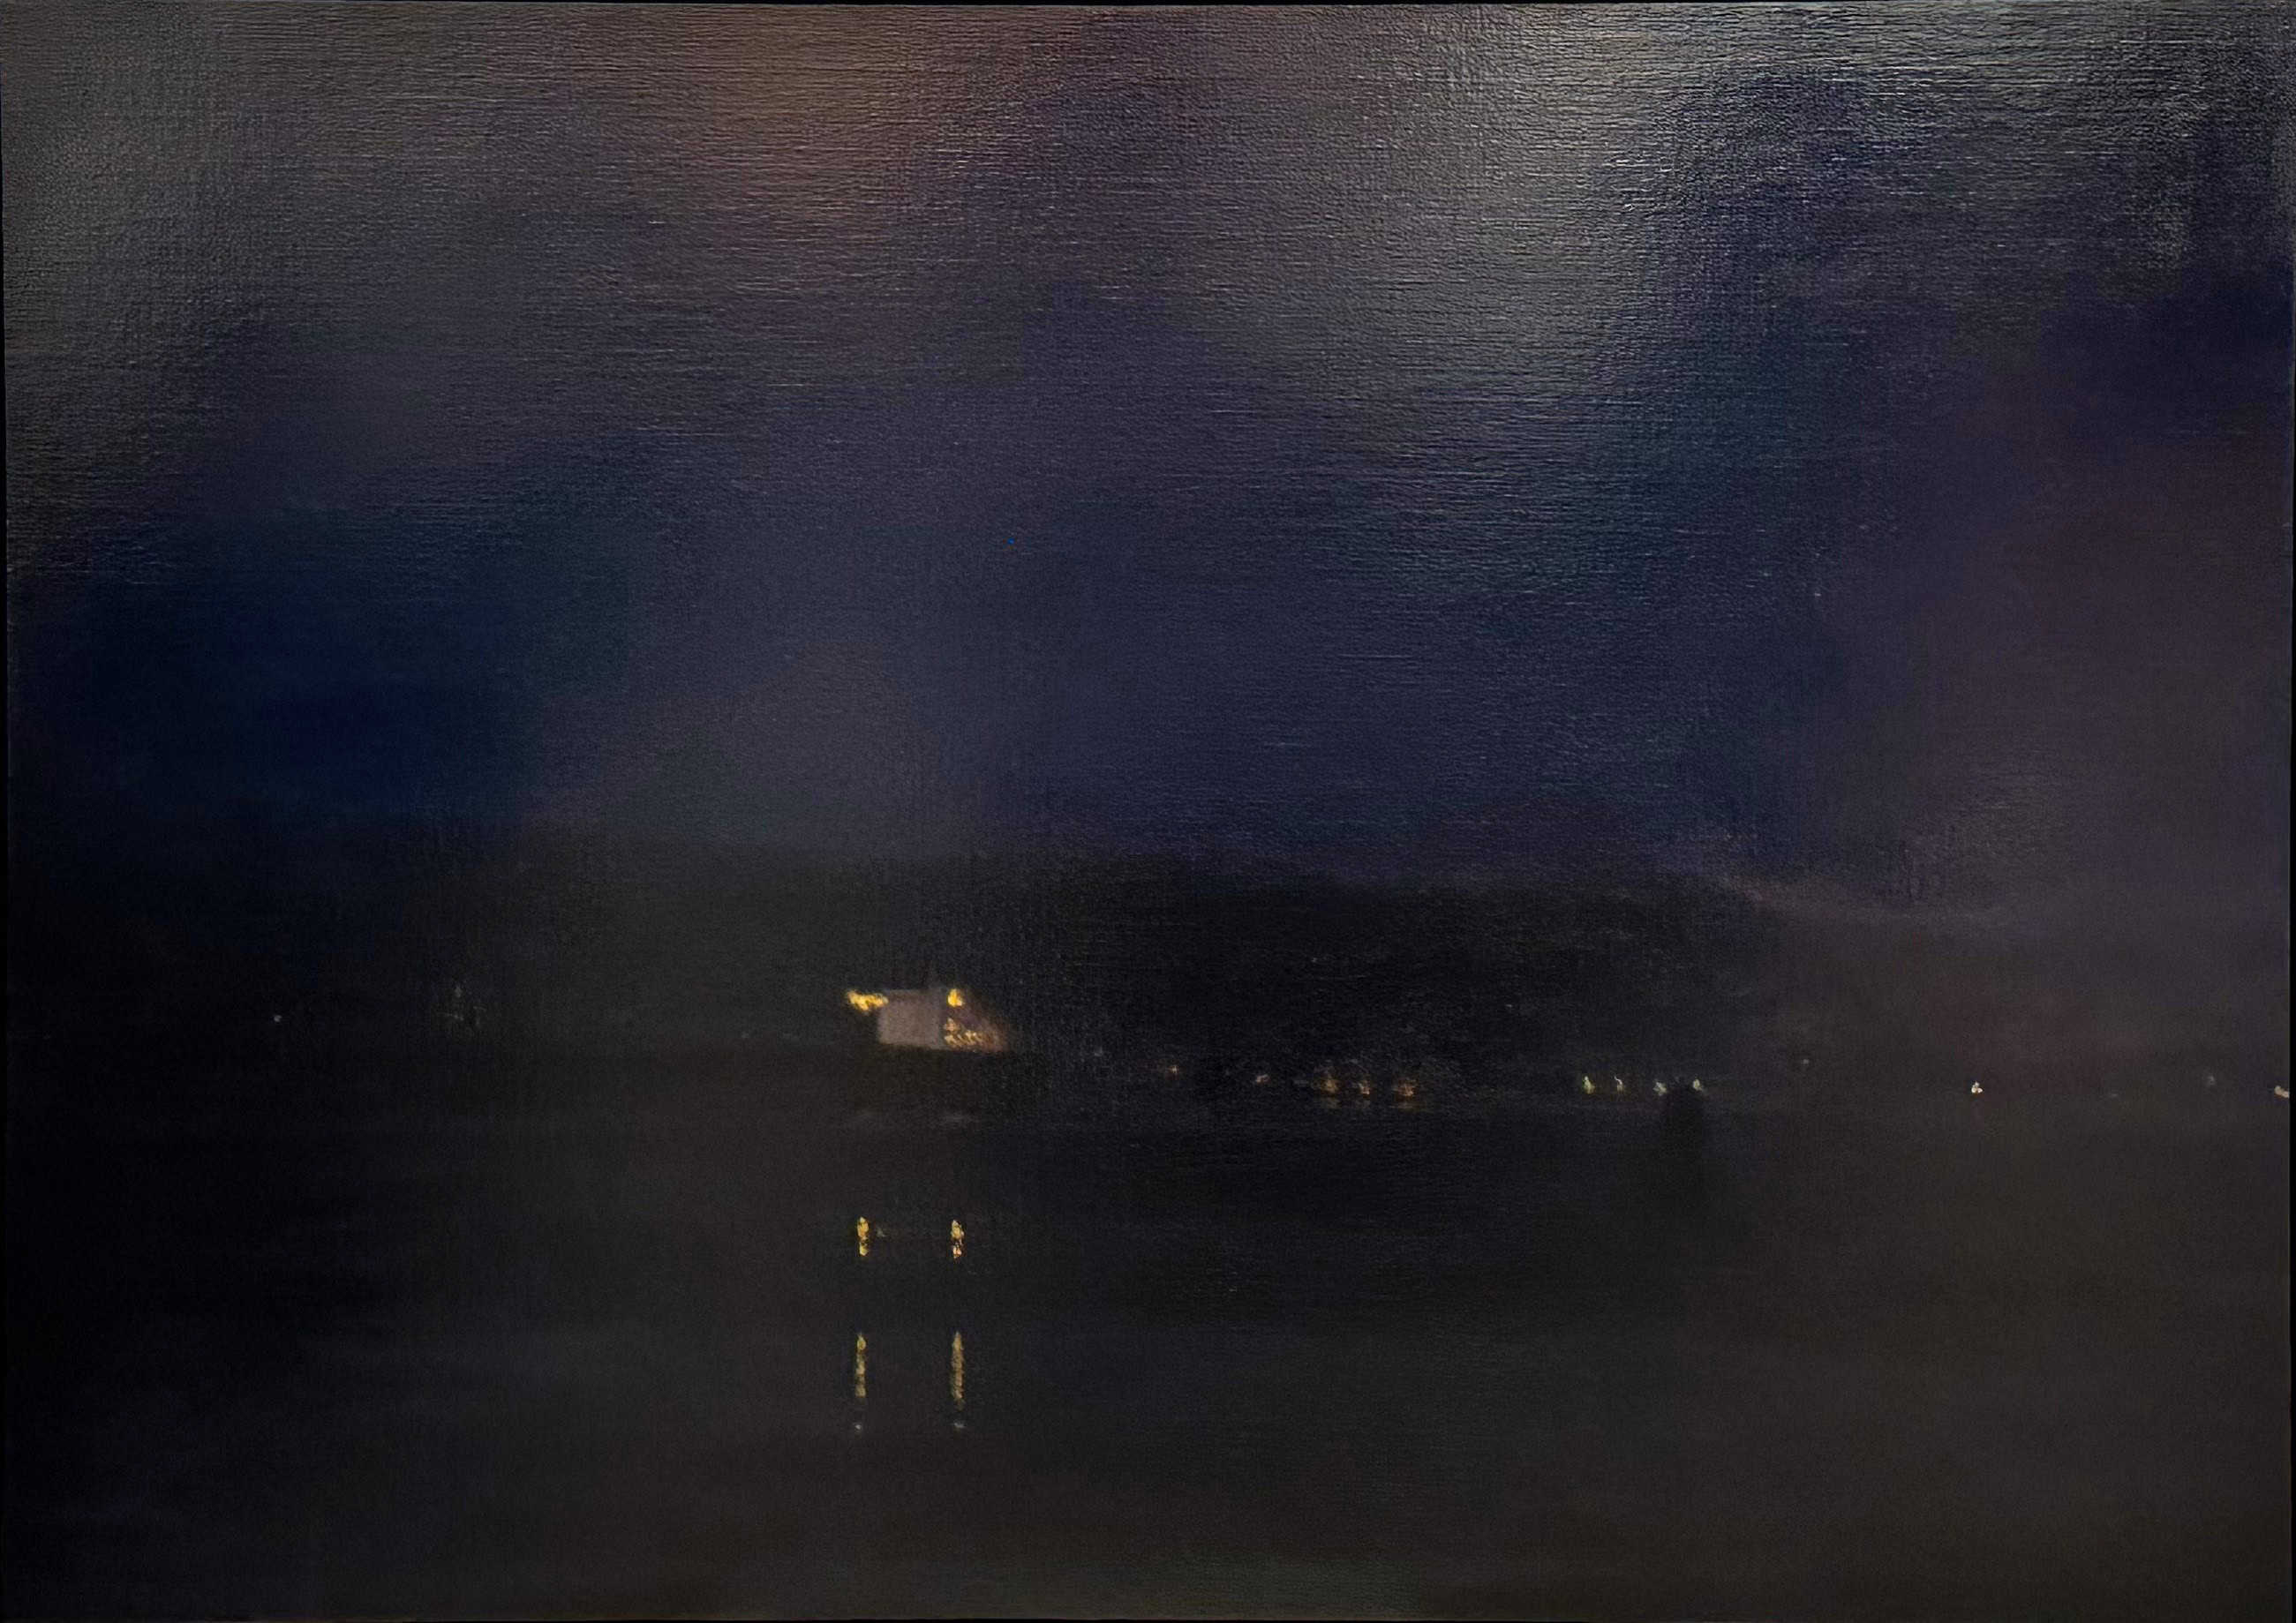 Contemporary art. Title: Nocturne In Blue, Oil on Canvas, 30 x 42 in by Canadian artist Paul Chizik.